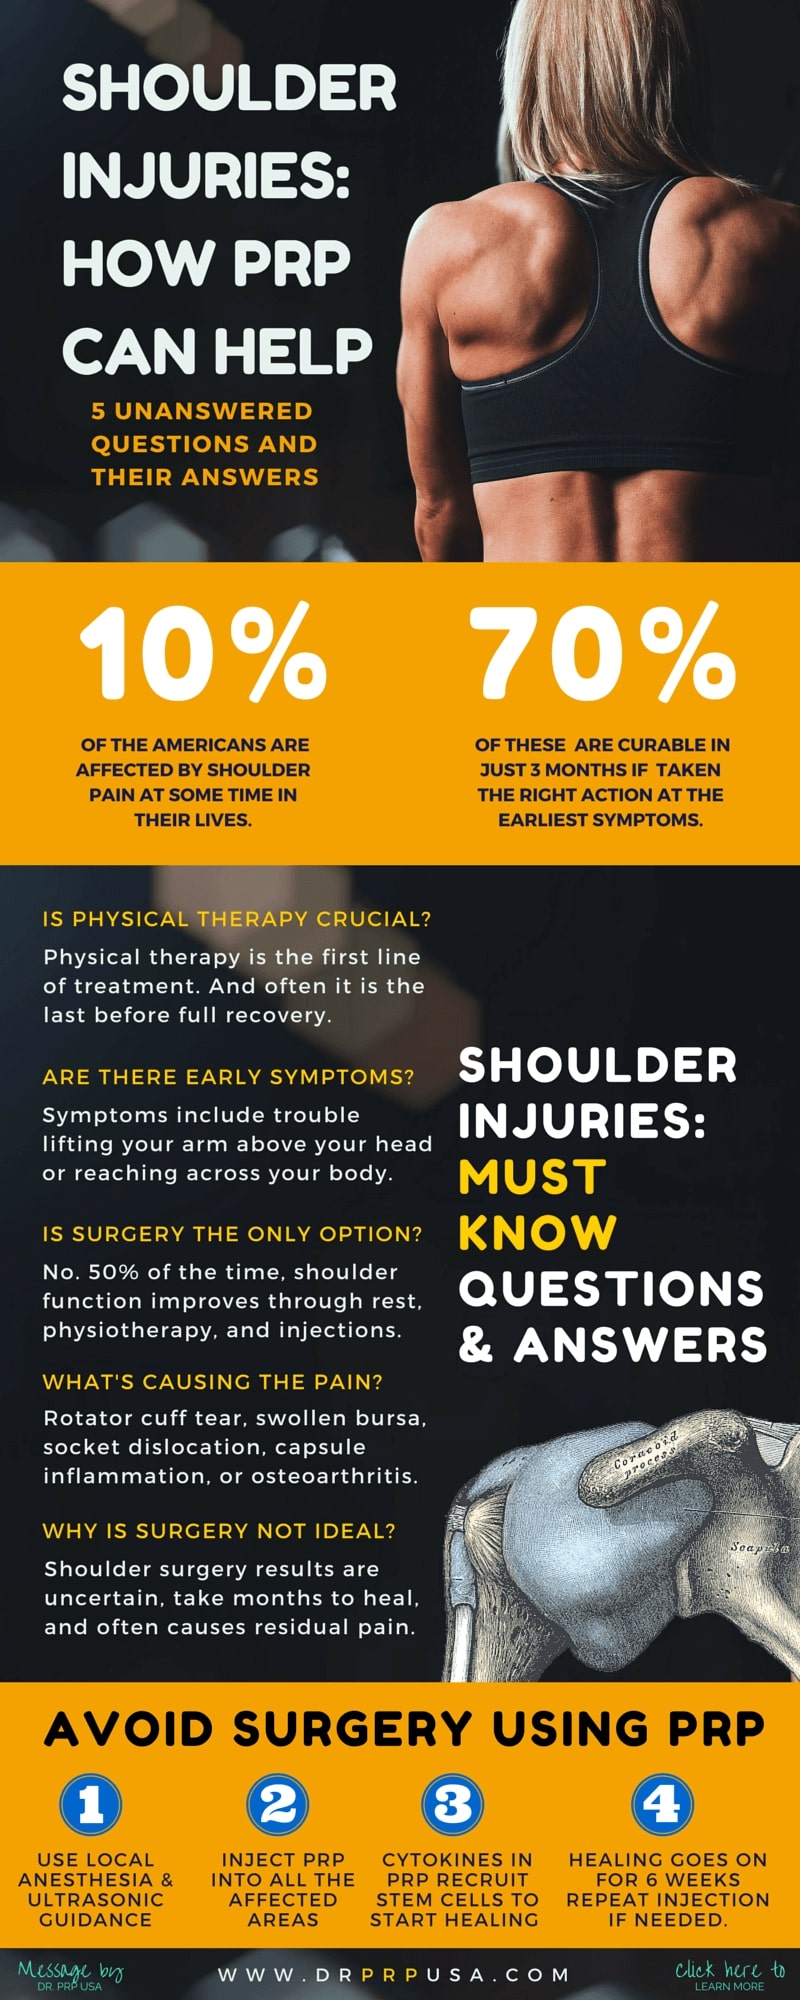 PRP Injection For Shoulder: Heal Injury Without Surgery [INFOGRAPHIC]